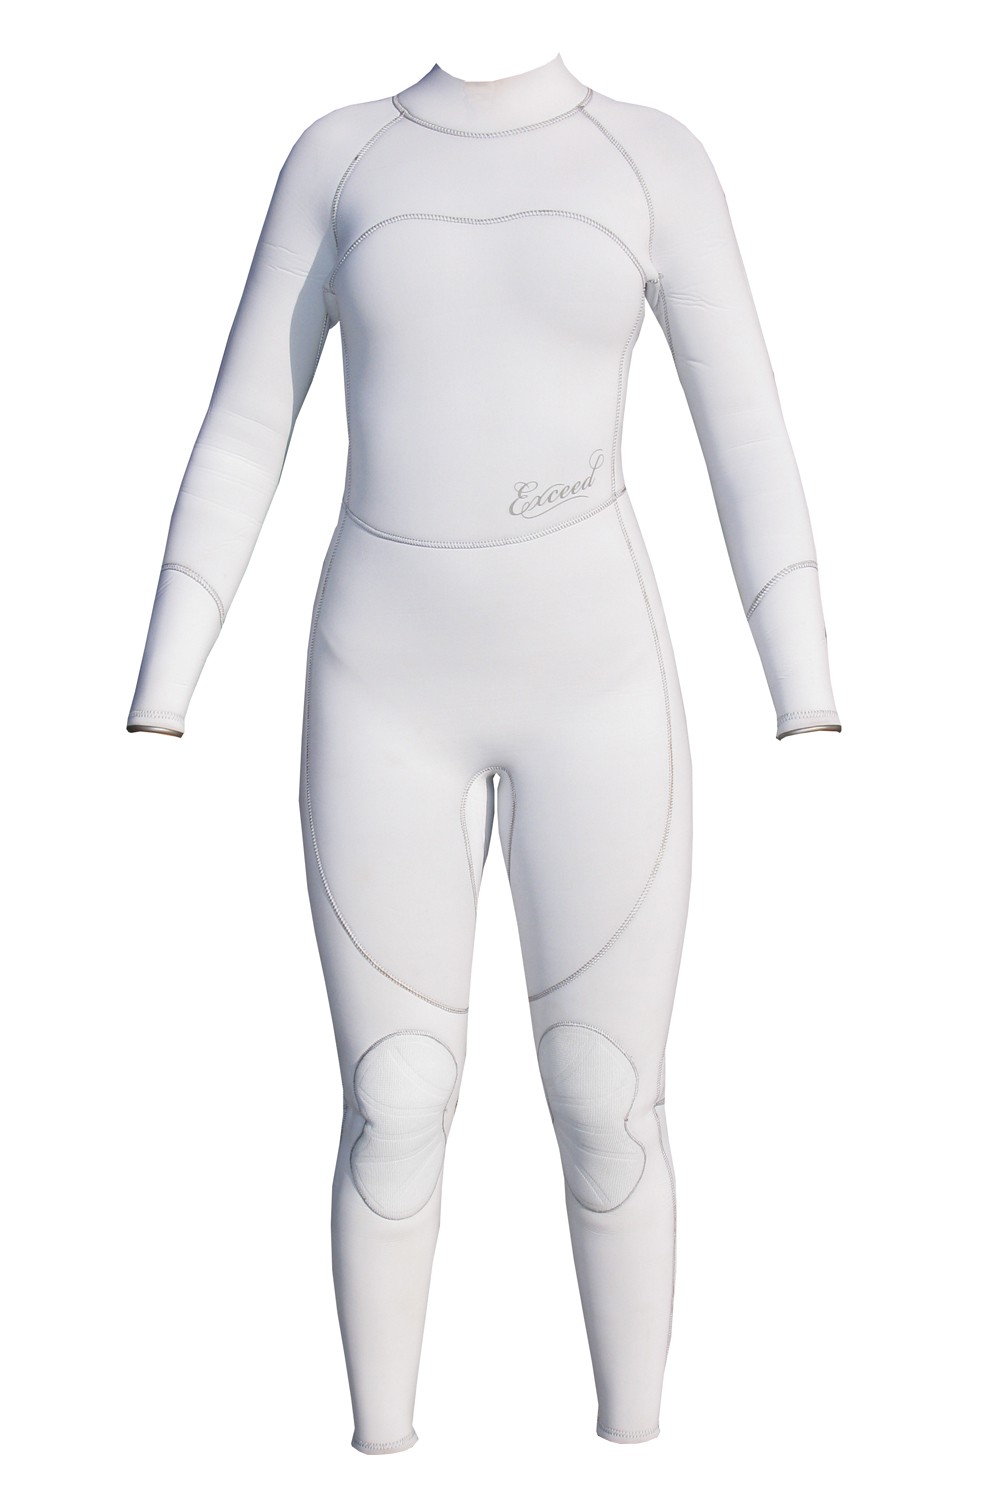 Exceed Empress White Womens 3/2mm Full Wetsuit